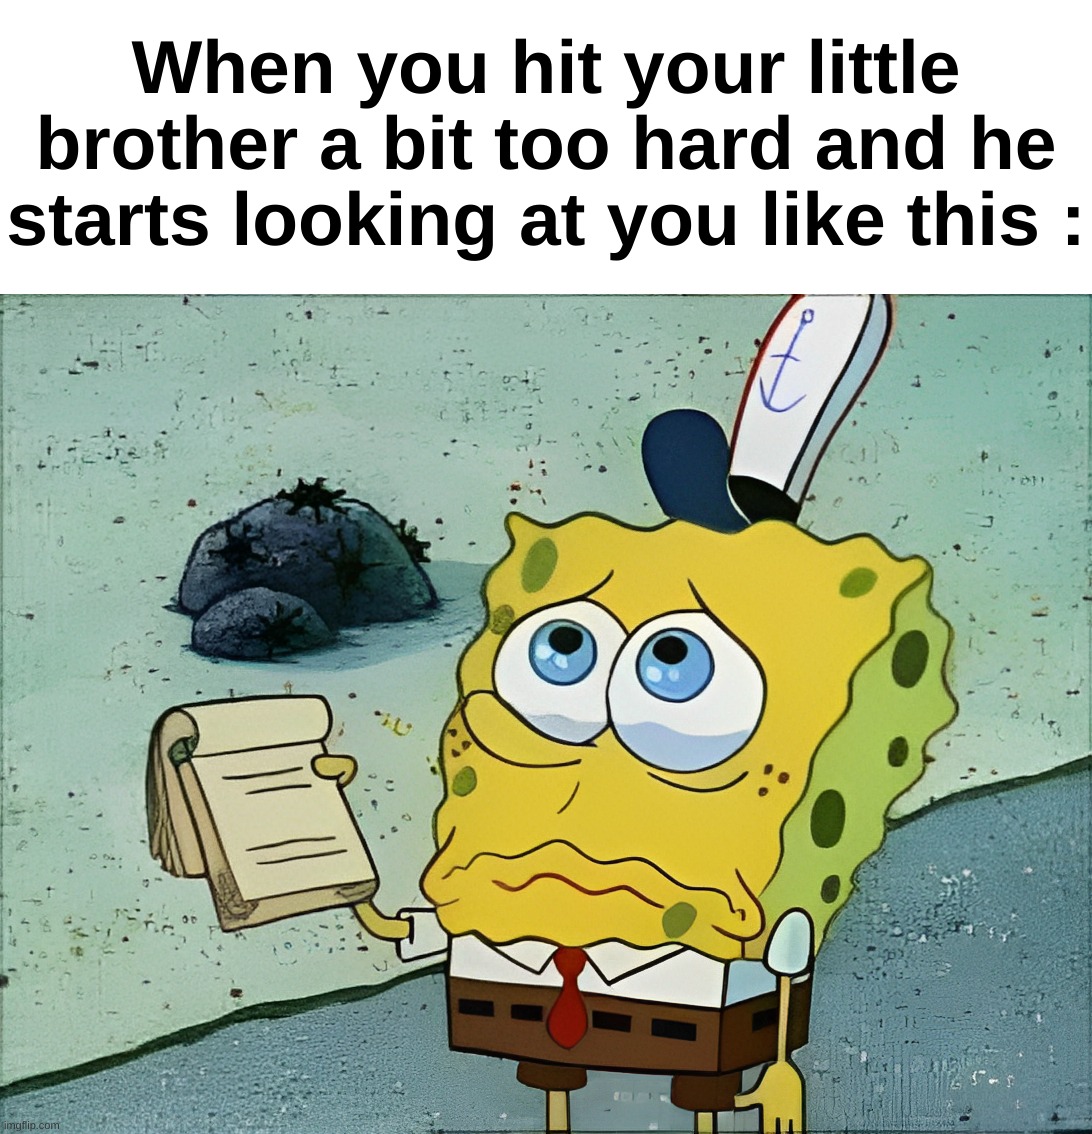 "No don't tell mom" | When you hit your little brother a bit too hard and he starts looking at you like this : | image tagged in memes,funny,relatable,little brother,fight,front page plz | made w/ Imgflip meme maker